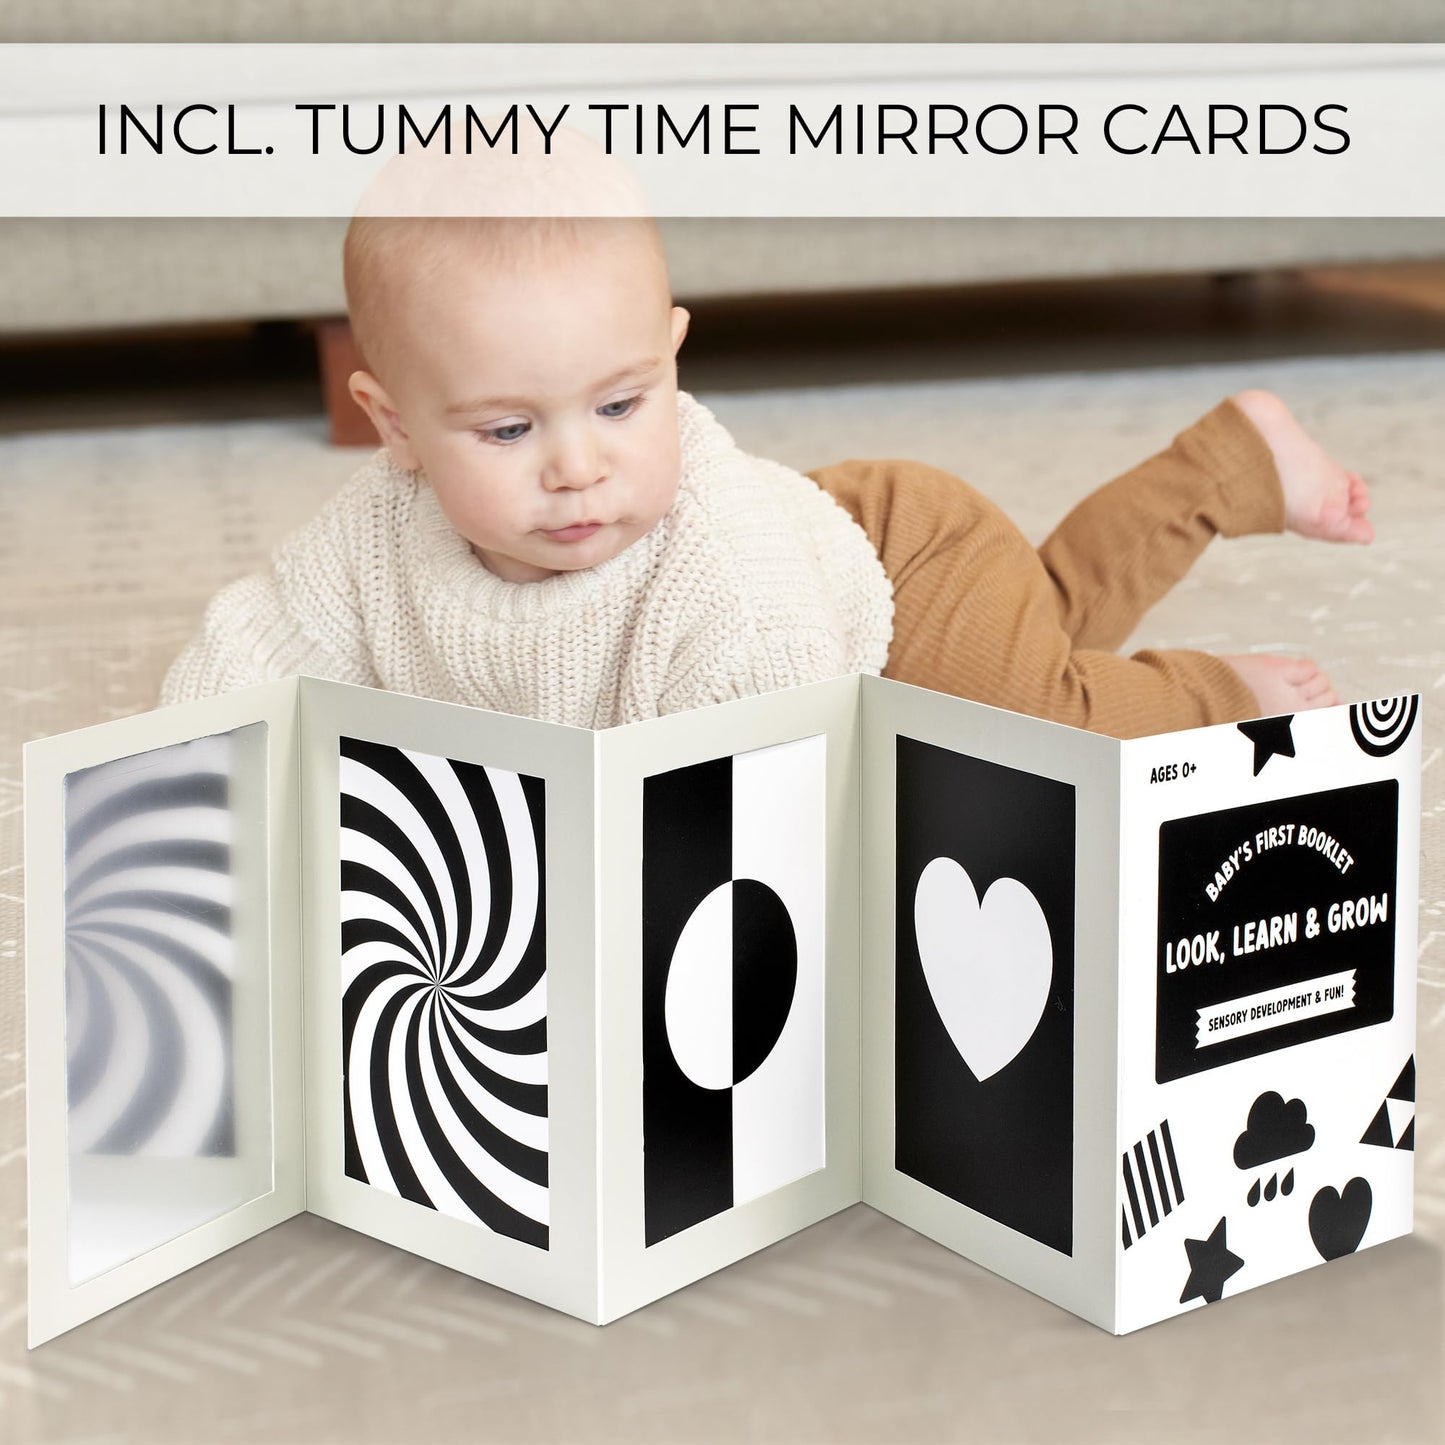 High Contrast Tummy Time Toy For Baby With Large Black and White Cards - Stimulating Sensory Development Boards & Mirror For Babies & Infants 0-3 Months - Twelve Montessori Patterns That Newborns Love